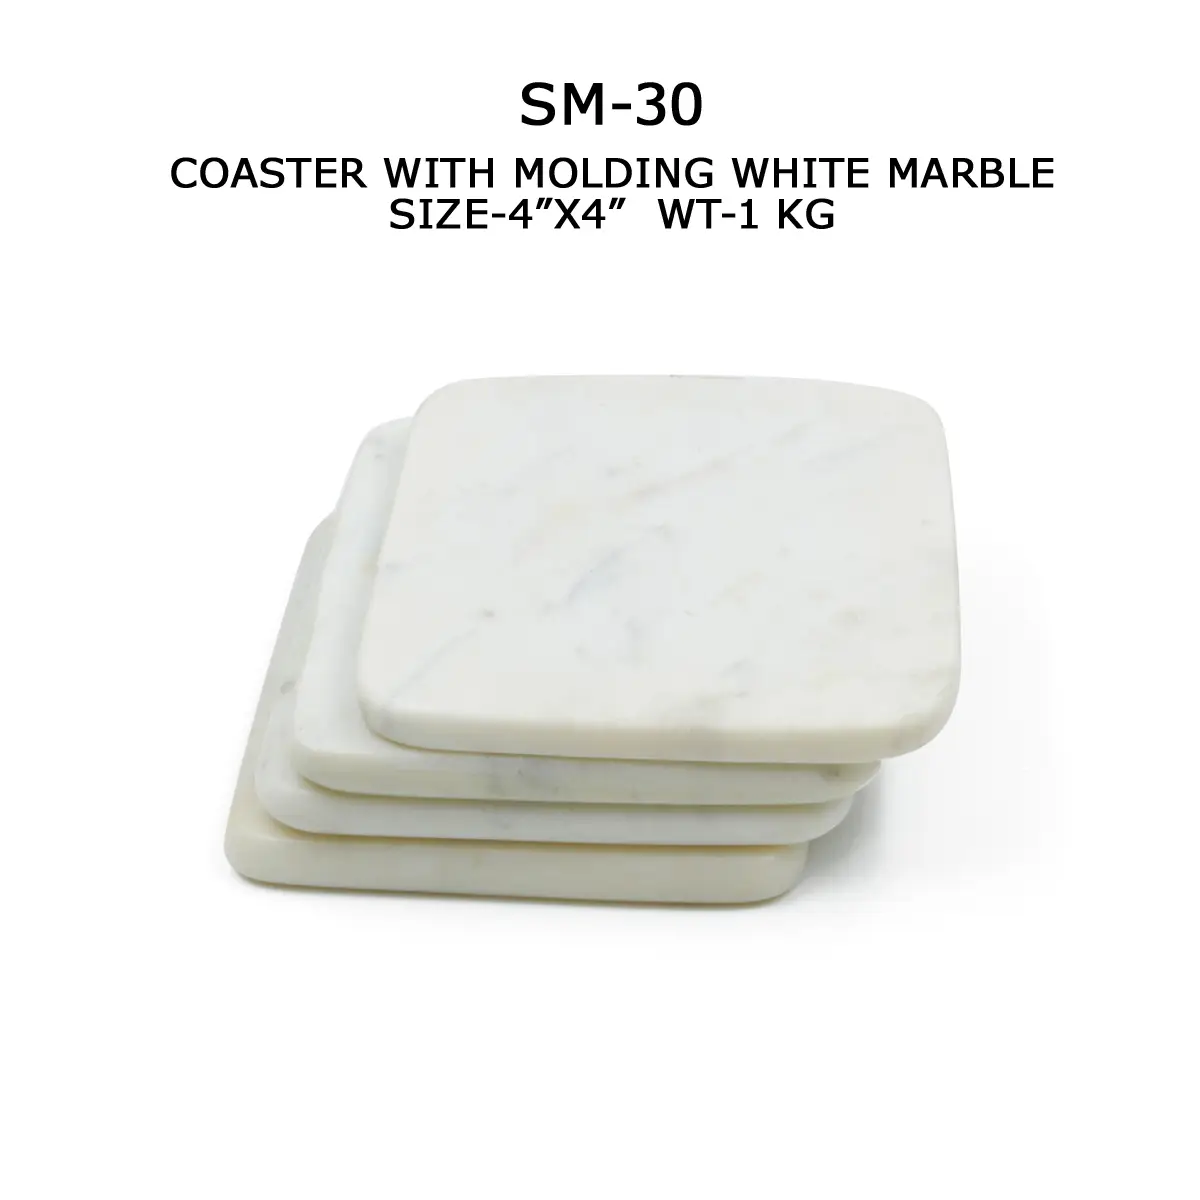 COASTER WITH MOLDING WHITE MARBLE